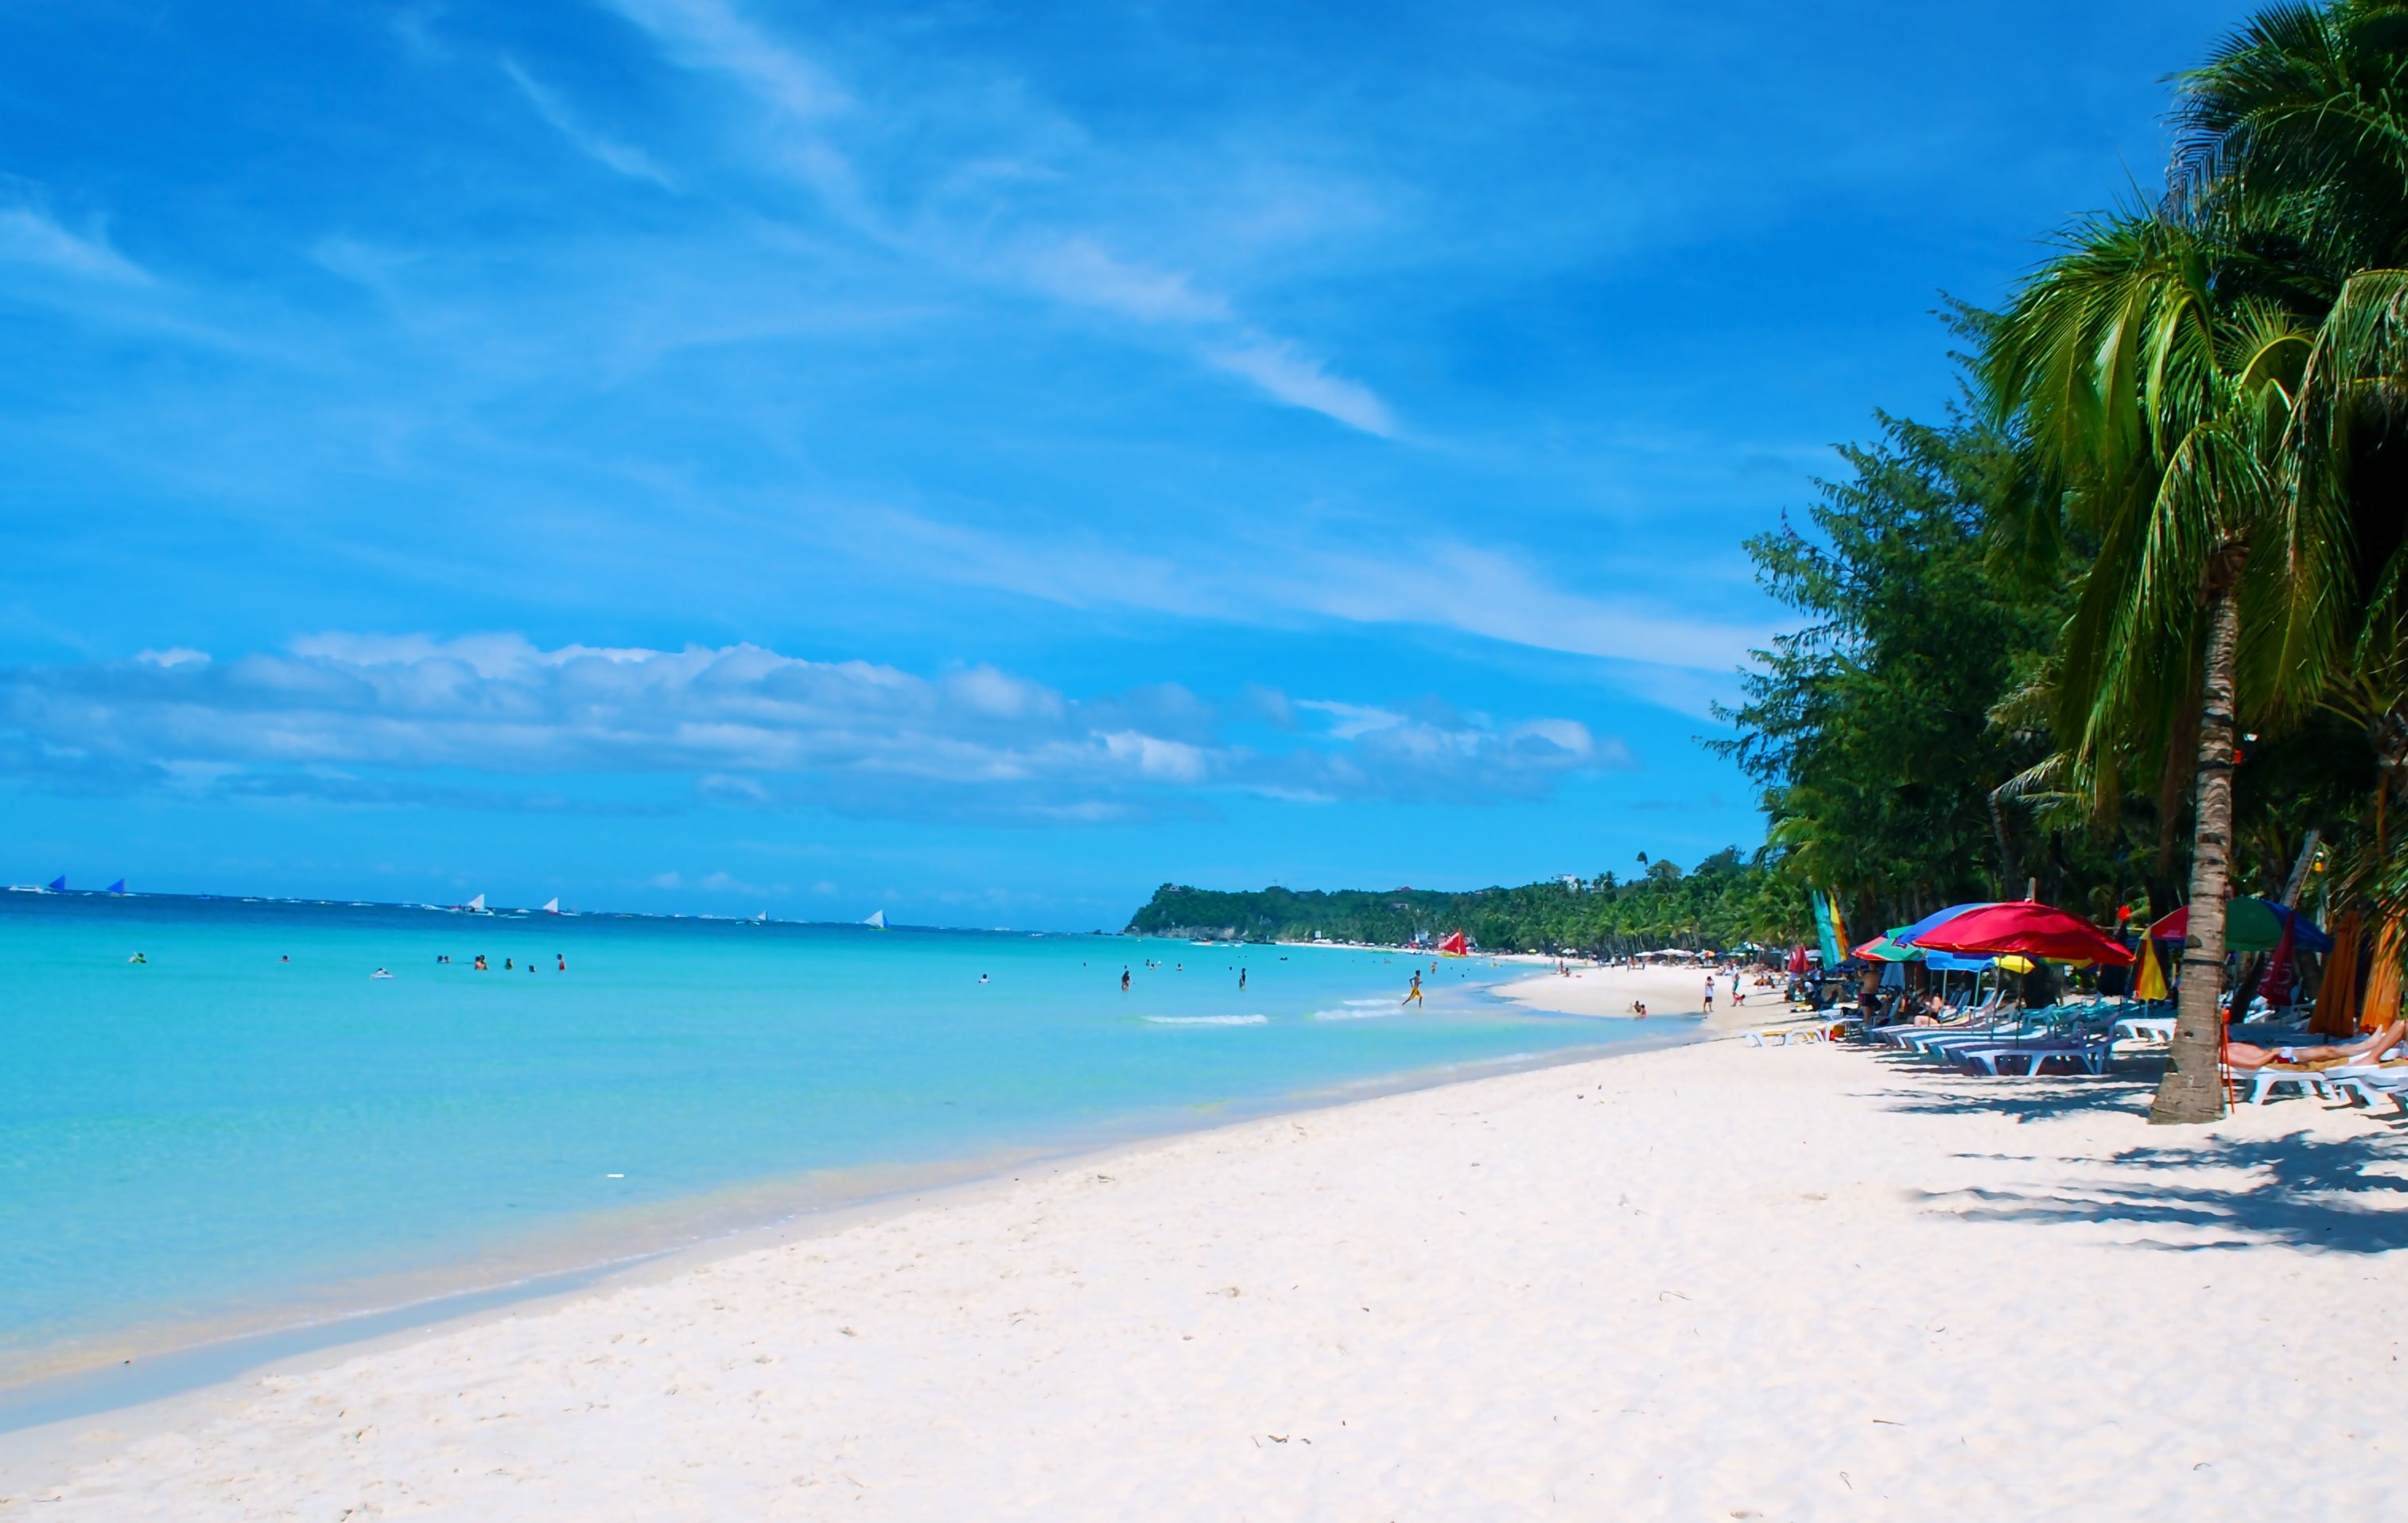 Boracay Beach is the most famous beach in the Philippines, and this ...